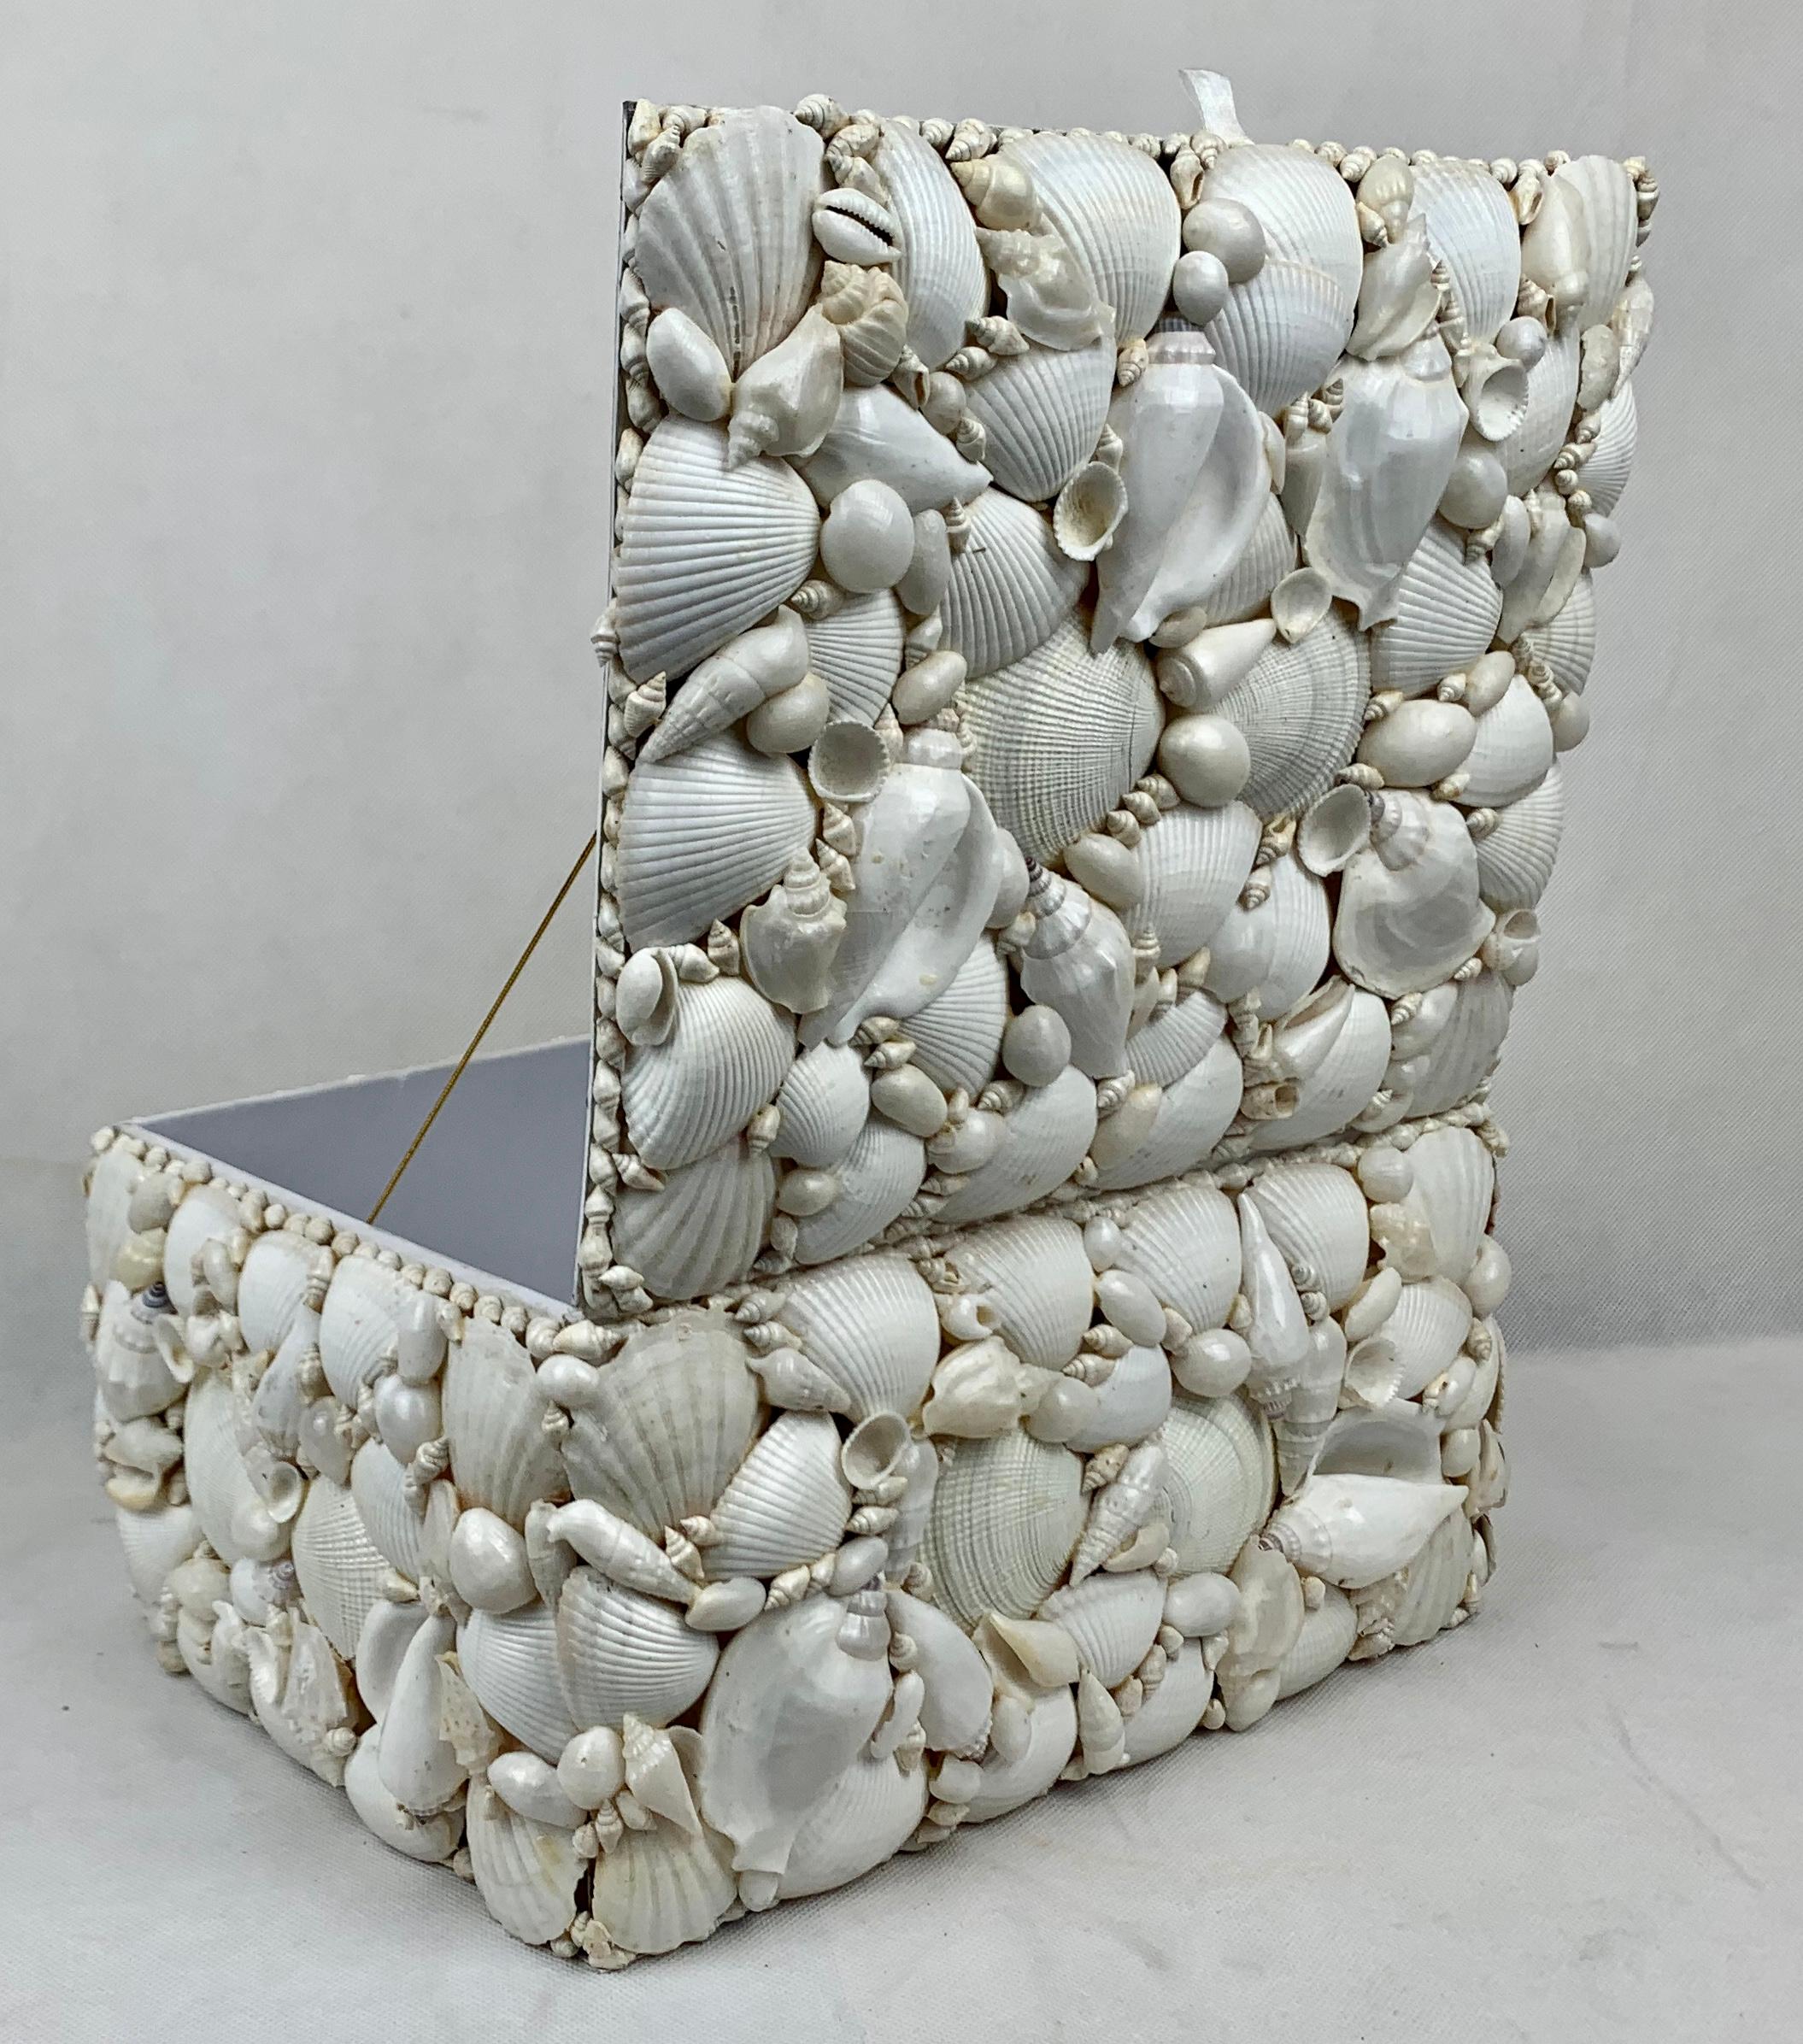 Large box encrusted with natural white sea shells. The box is hinged and lined in white. The shells are arranged in an attractive pattern with tiny shells used to create a border.
This is one of the larger boxes of its type that I have come